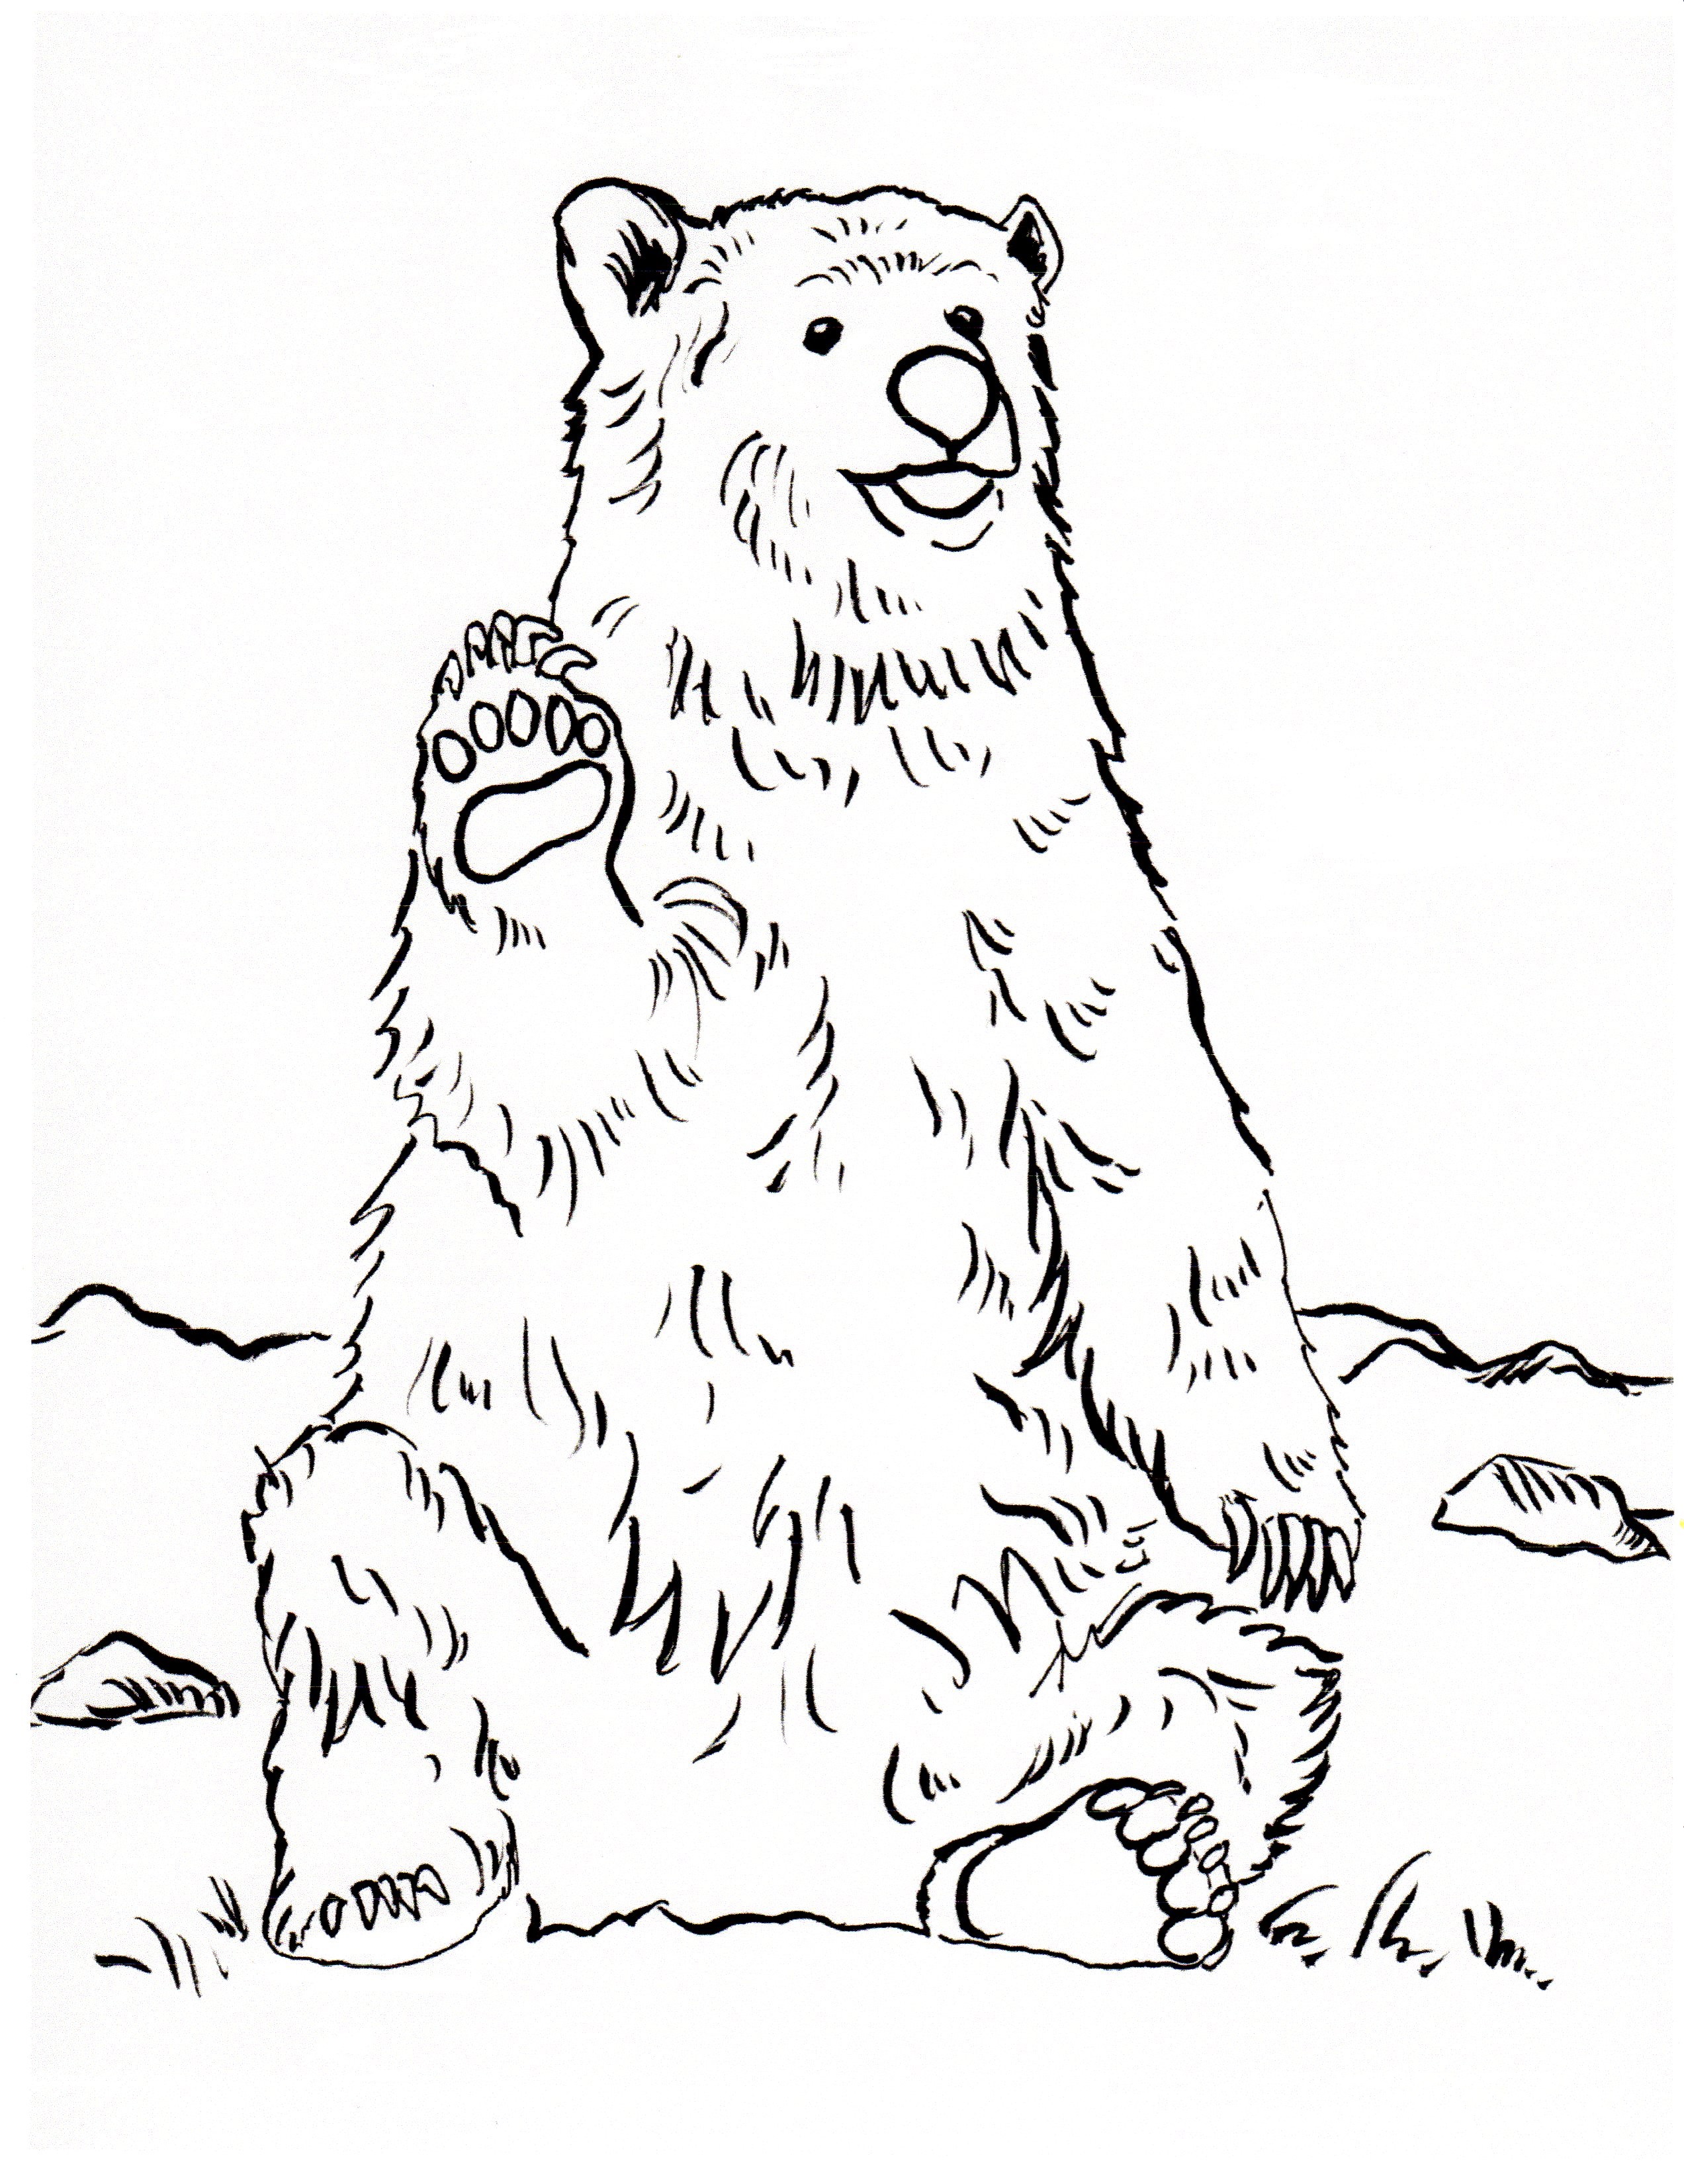 Grizzly Bear Coloring Page Samantha Bell